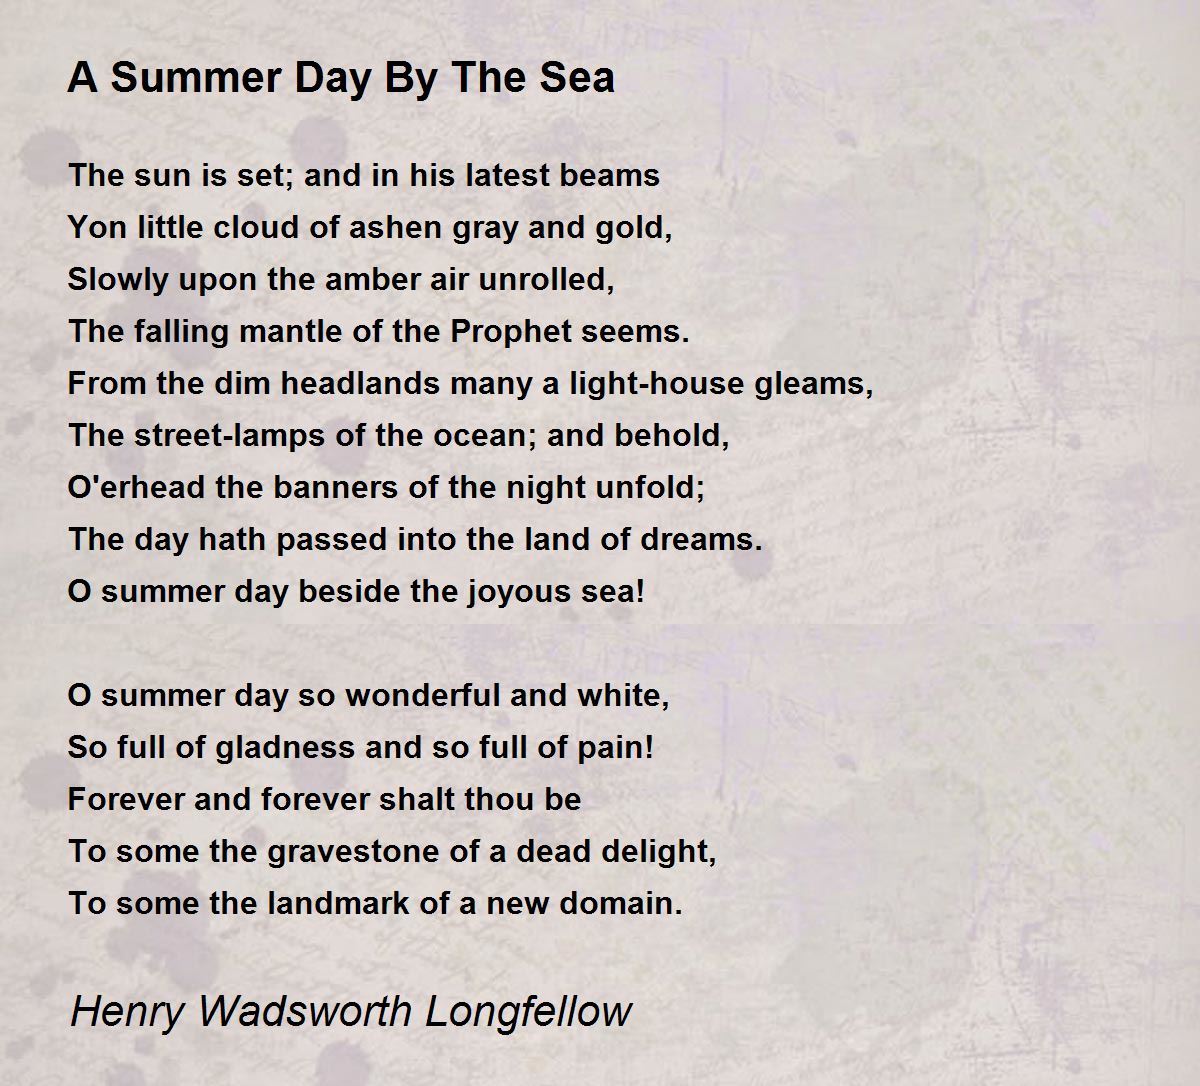 A Summer Day By The Sea Poem by Henry Wadsworth Longfellow - Poem